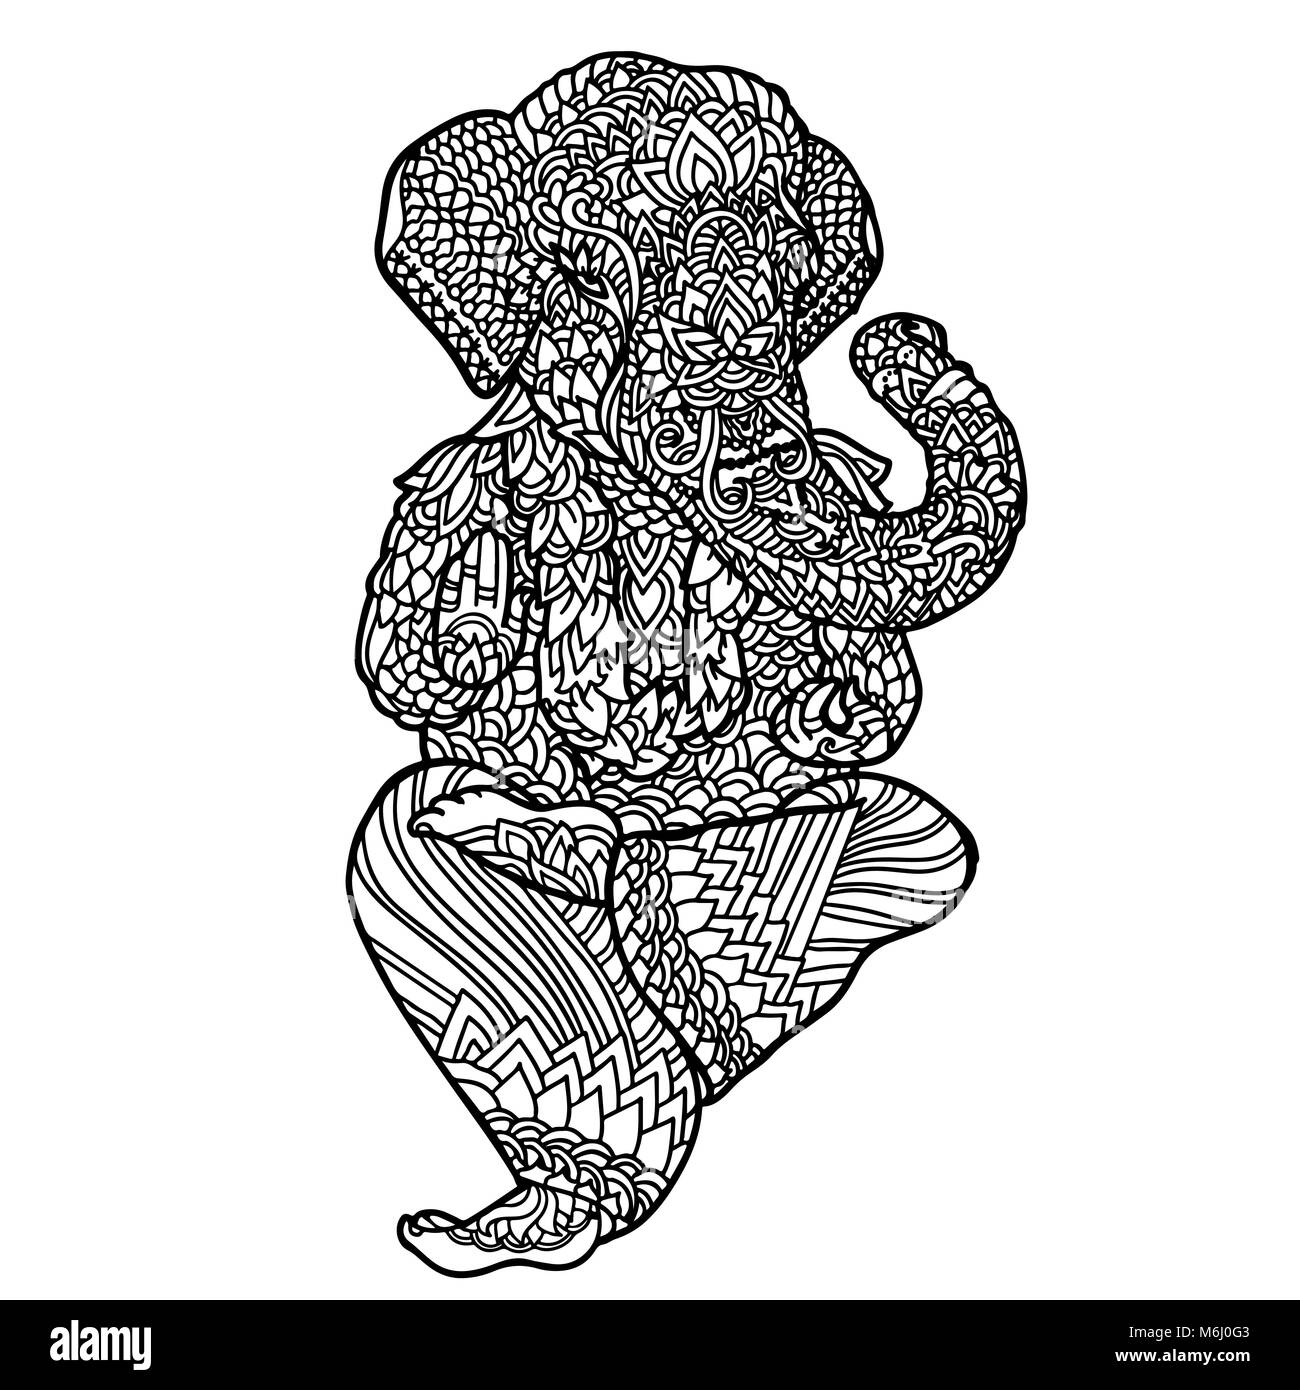 Lord Ganesha on indian mandala style. Asian pattern with leaves and flowers. Yoga style print. Black and white vector illustration. Stock Vector